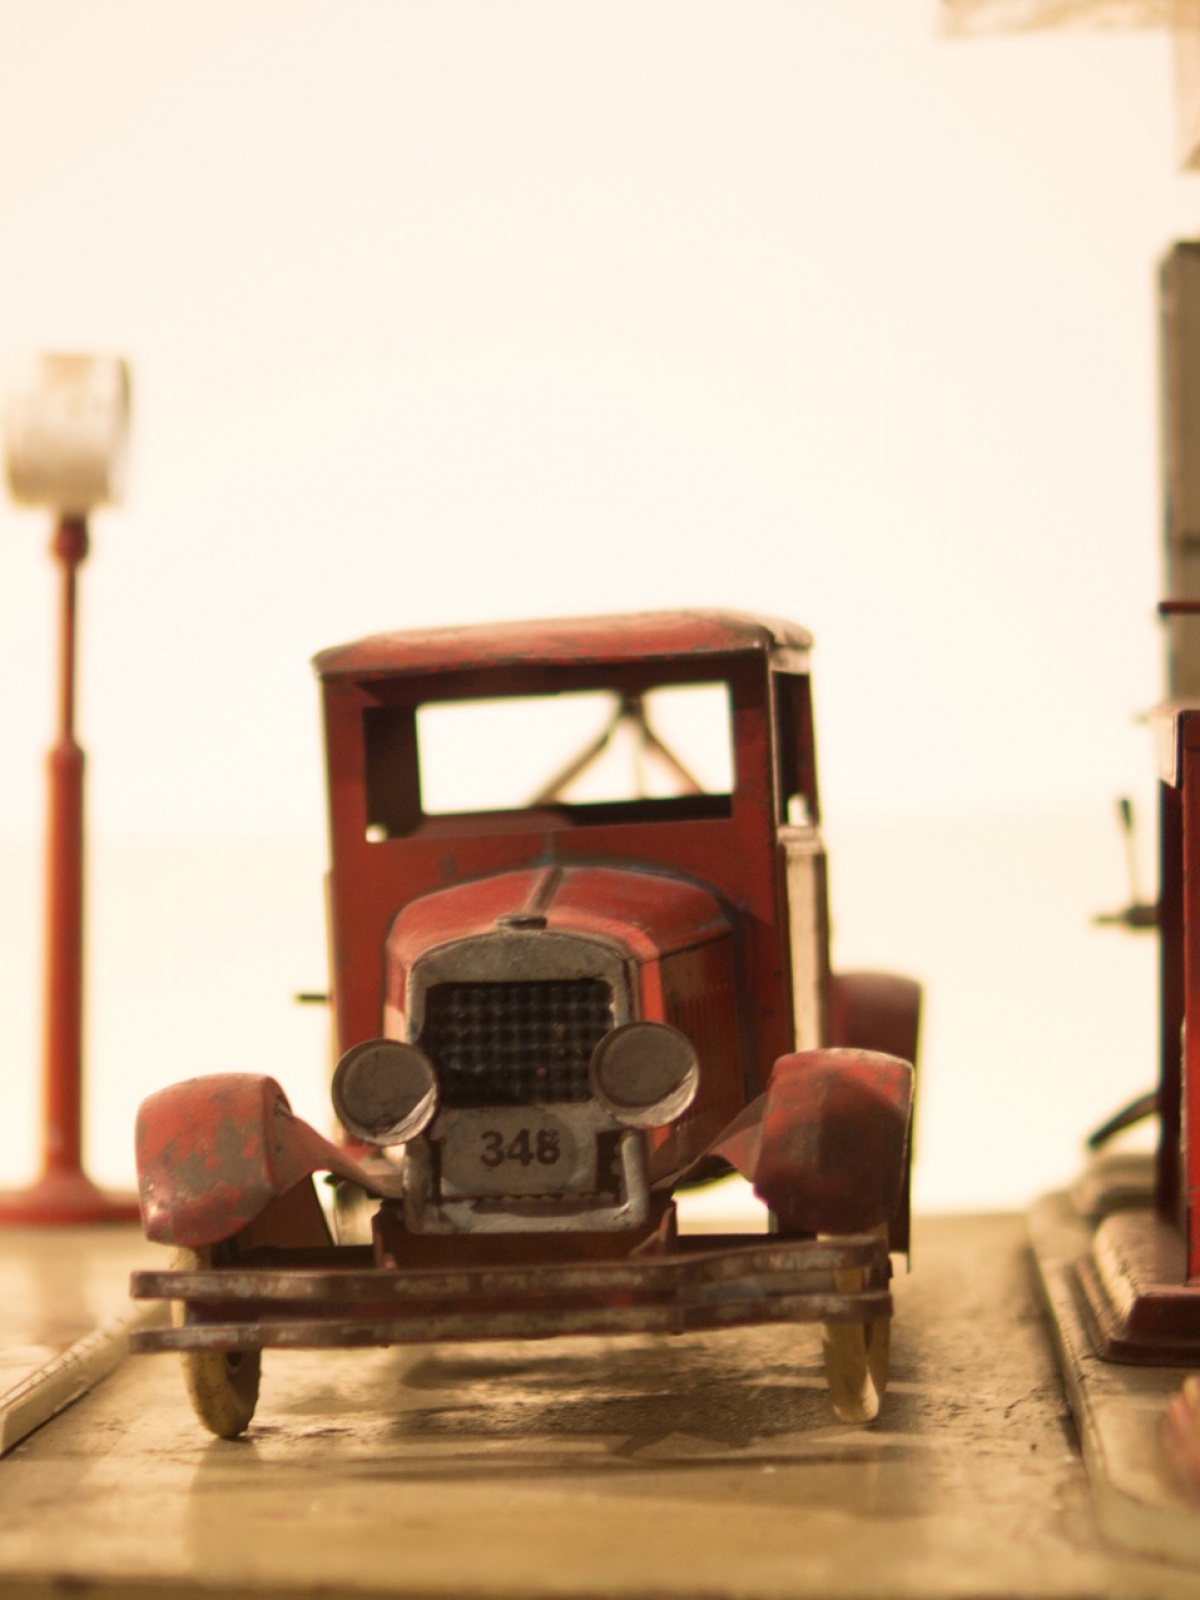 Antique Gas Station Toys - HD Wallpaper 